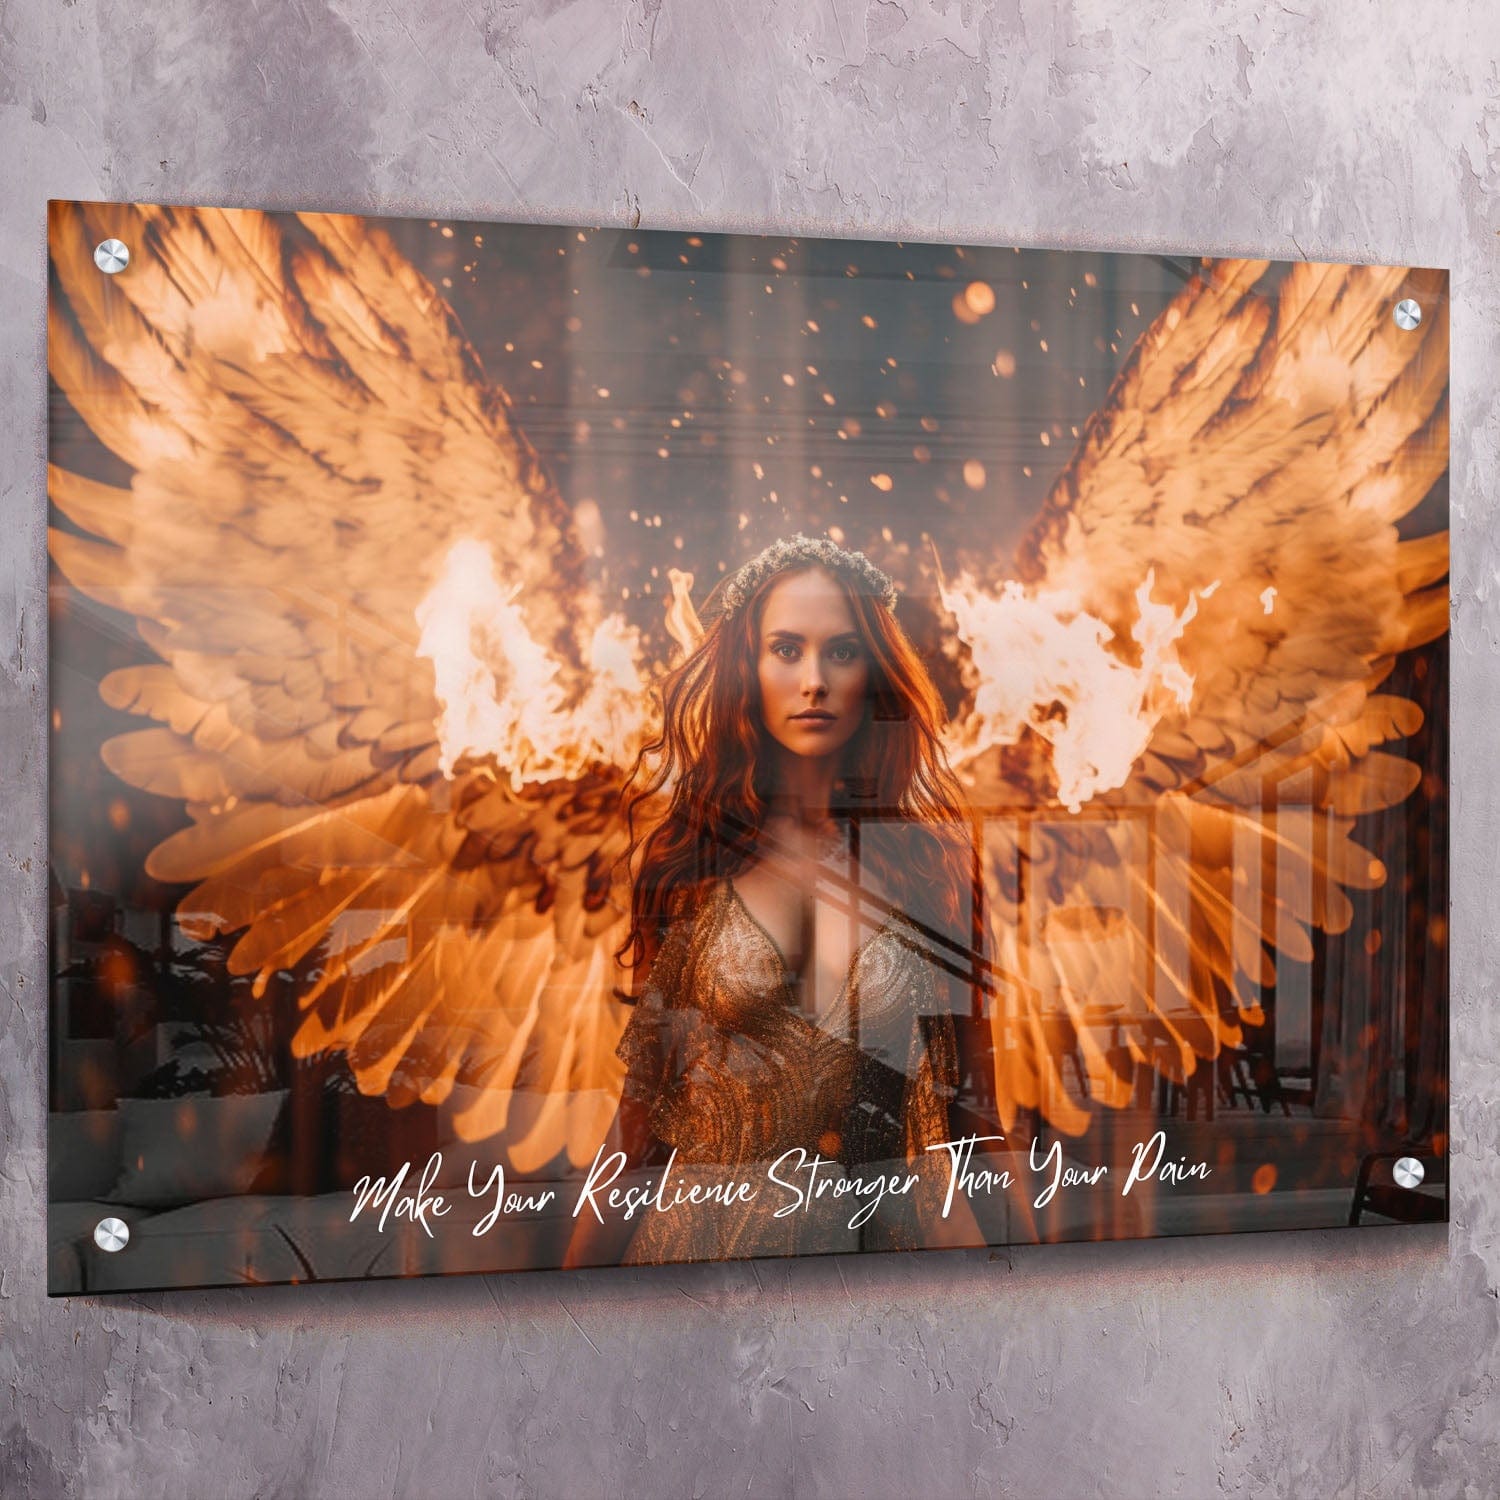 Angel on Fire - Resilience Stronger Than Pain Quote Wall Art | Inspirational Wall Art Motivational Wall Art Quotes Office Art | ImpaktMaker Exclusive Canvas Art Landscape